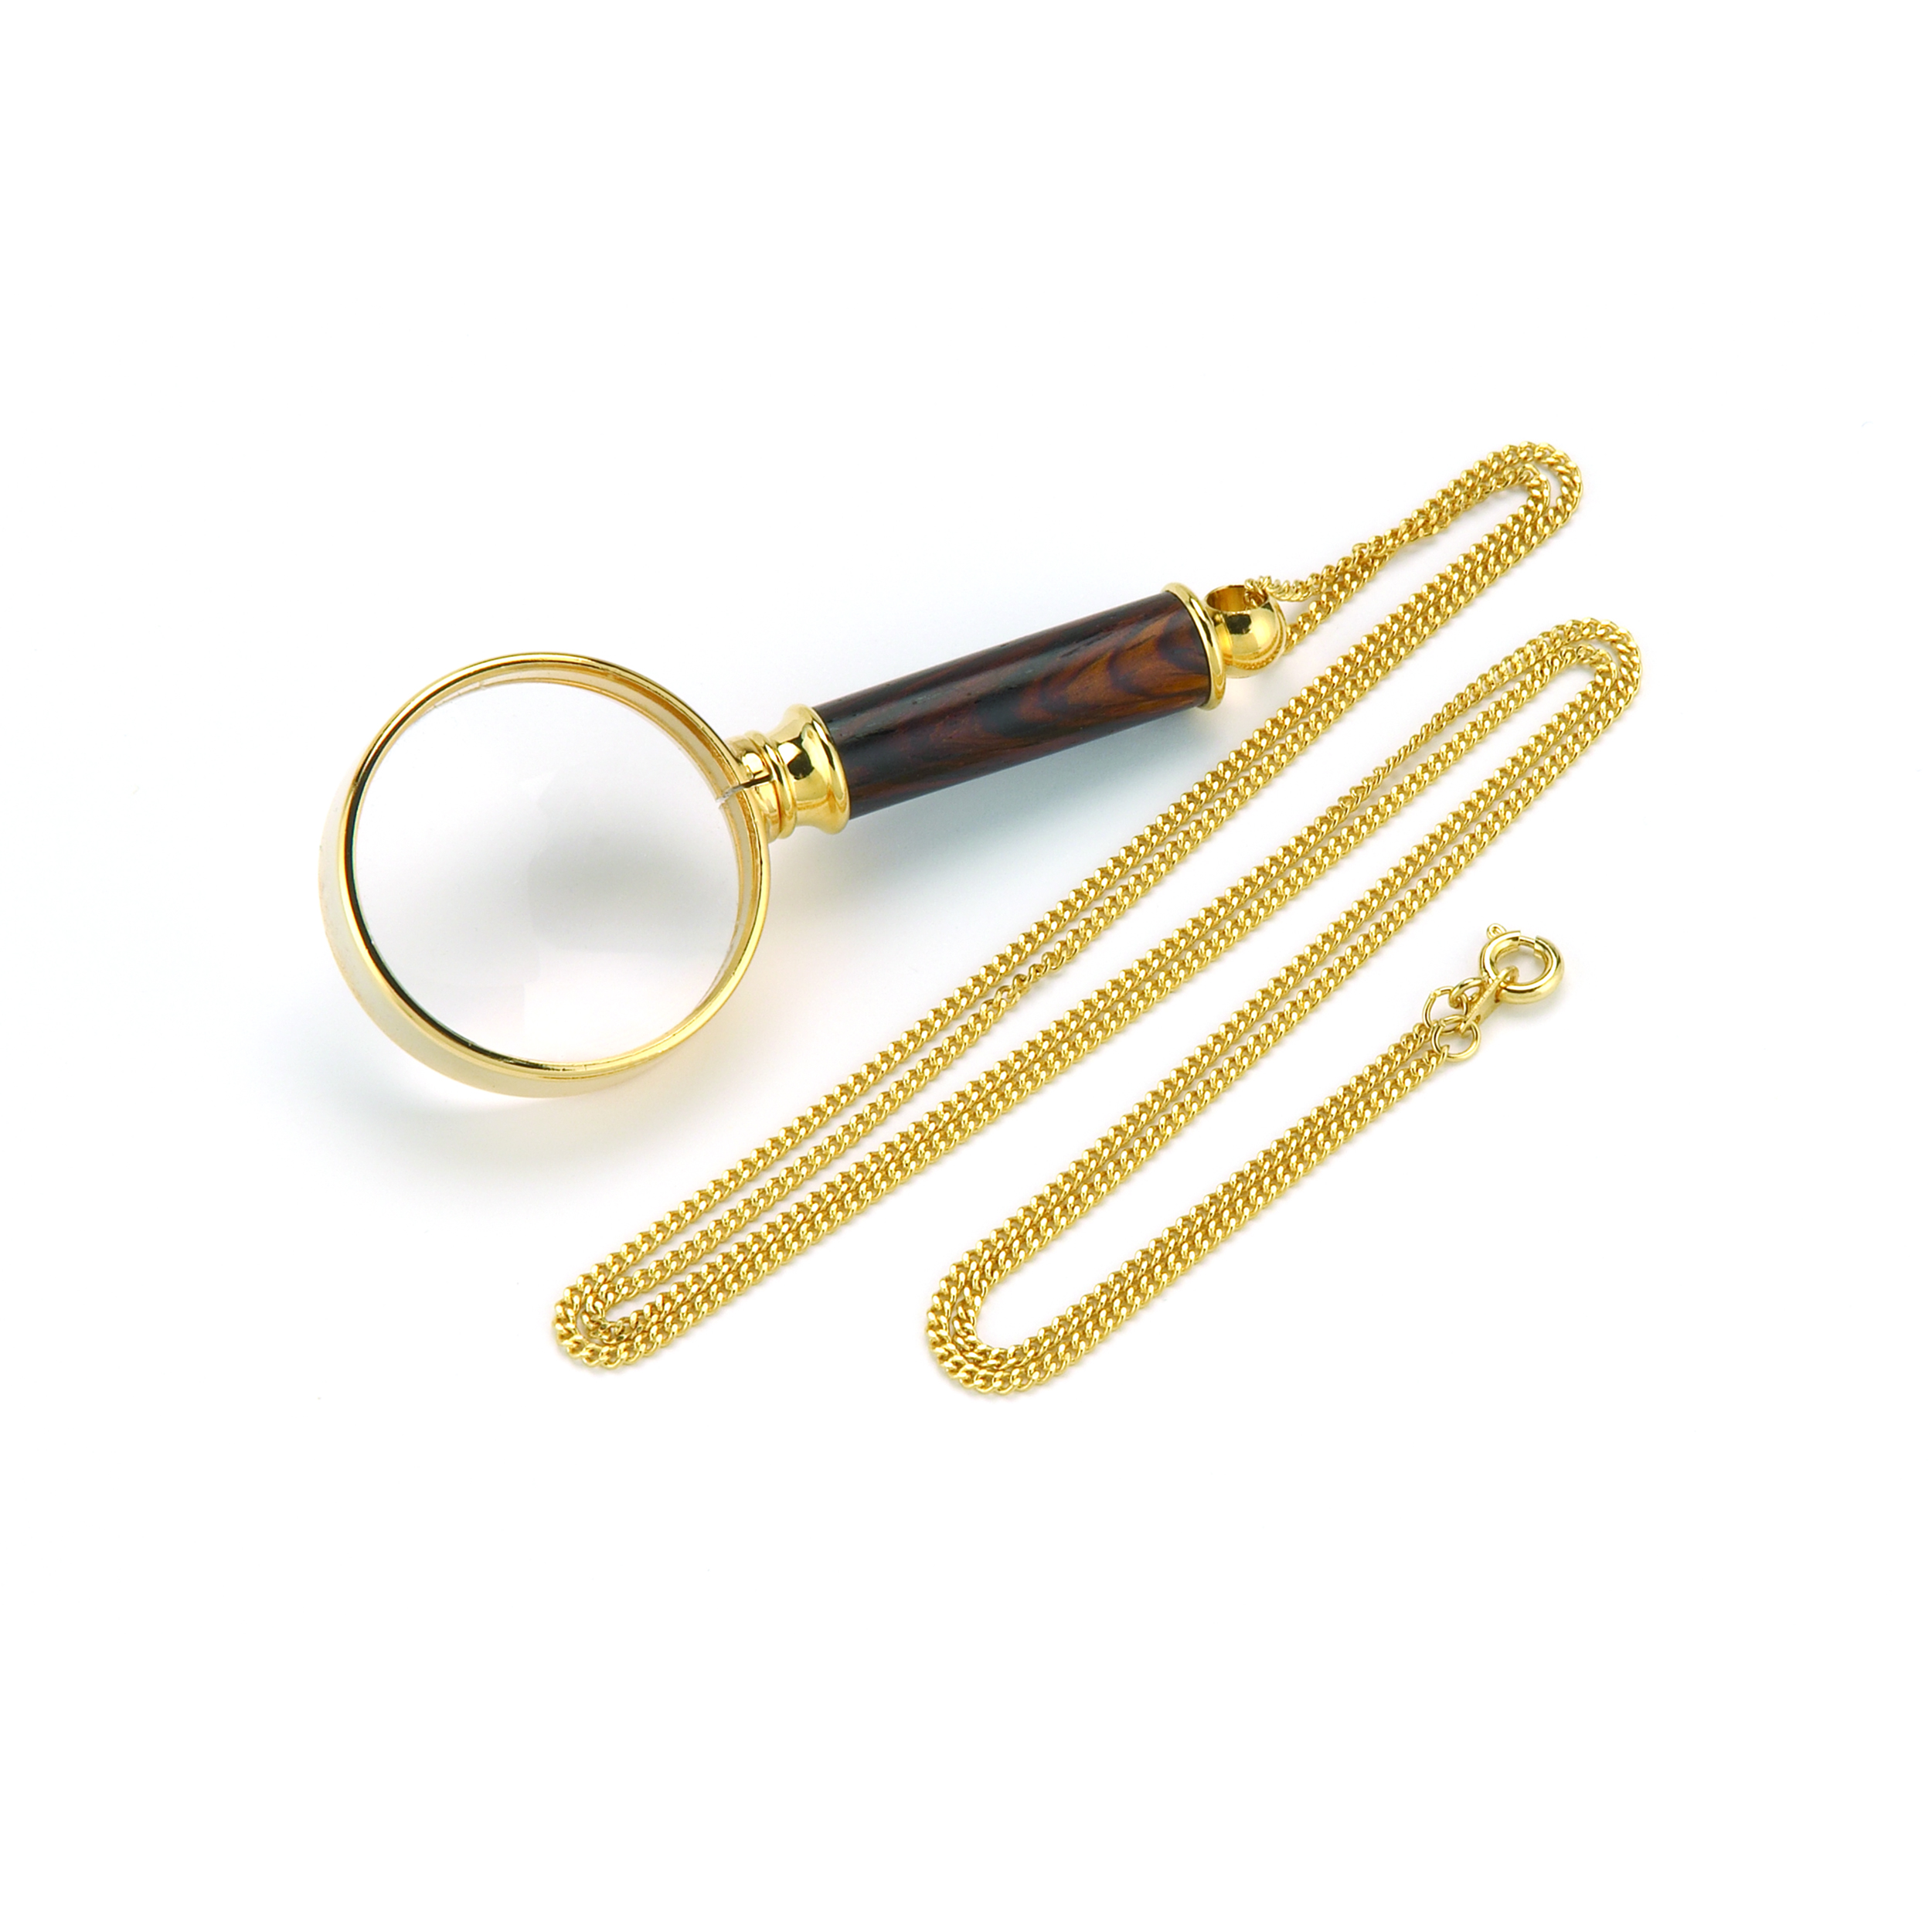 Necklace Magnifying Glass Kit